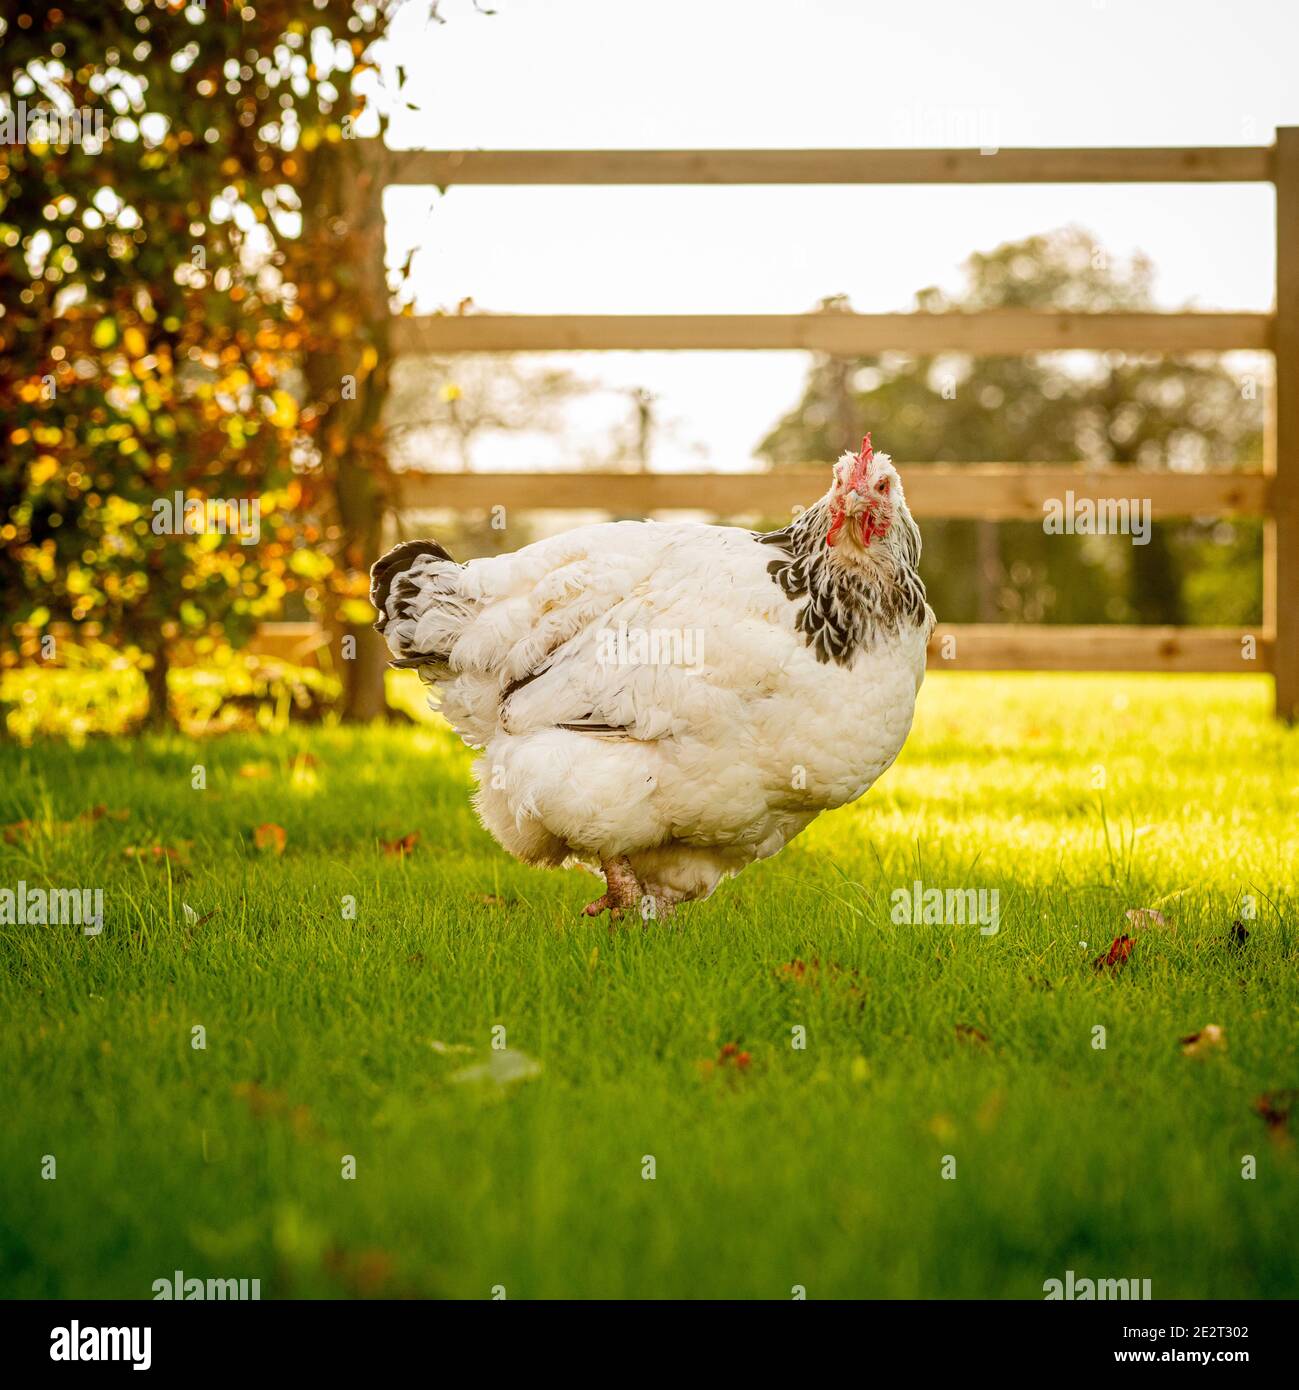 Chicken in field with wooden gate and hedge behind Stock Photo